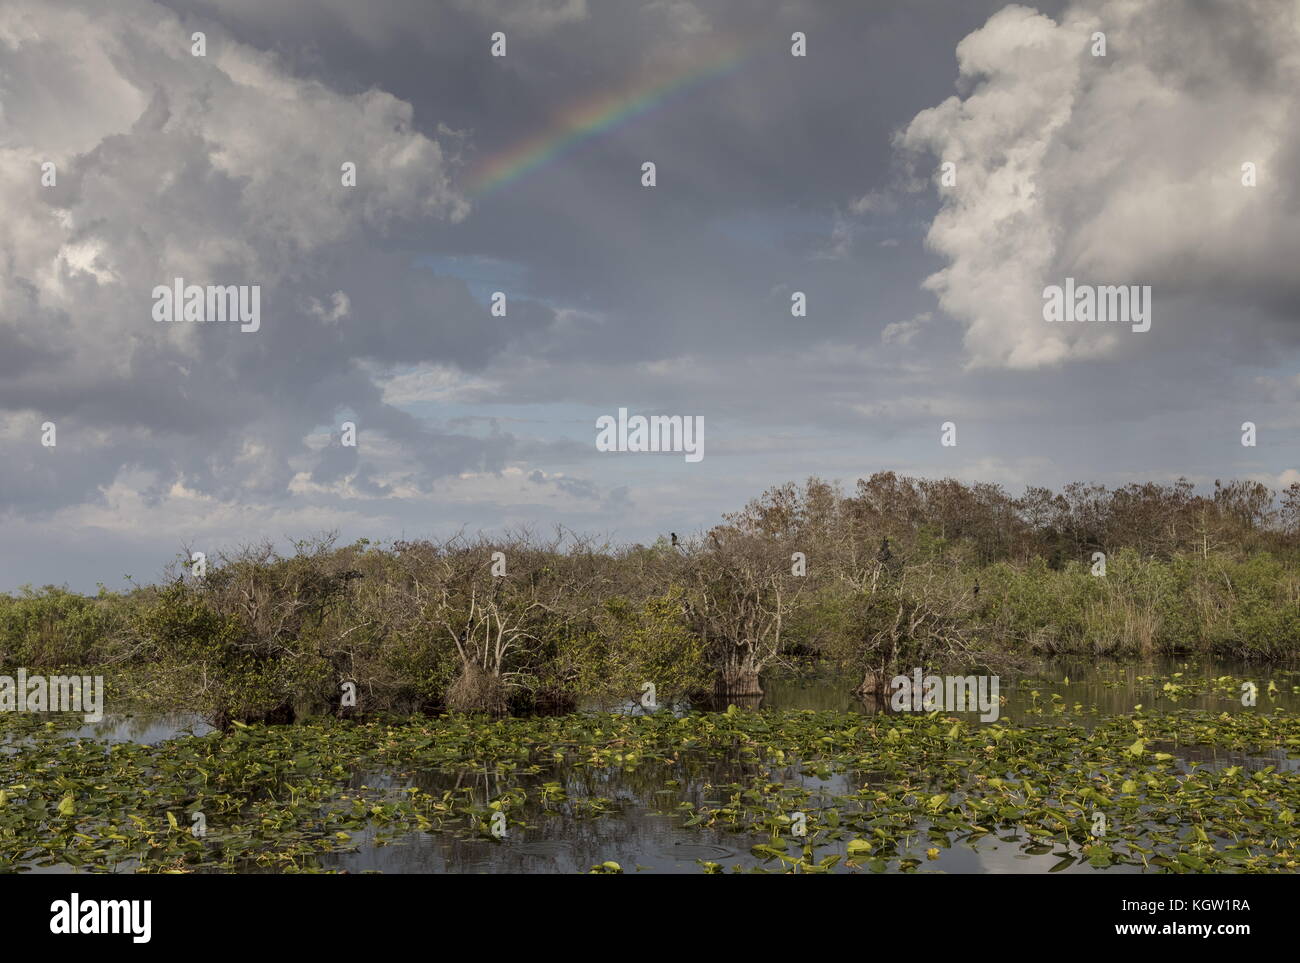 Pond apple trees, Annona glabra, with Anhingas in the Everglades National Park, along the Anhinga trail. Florida. Stock Photo